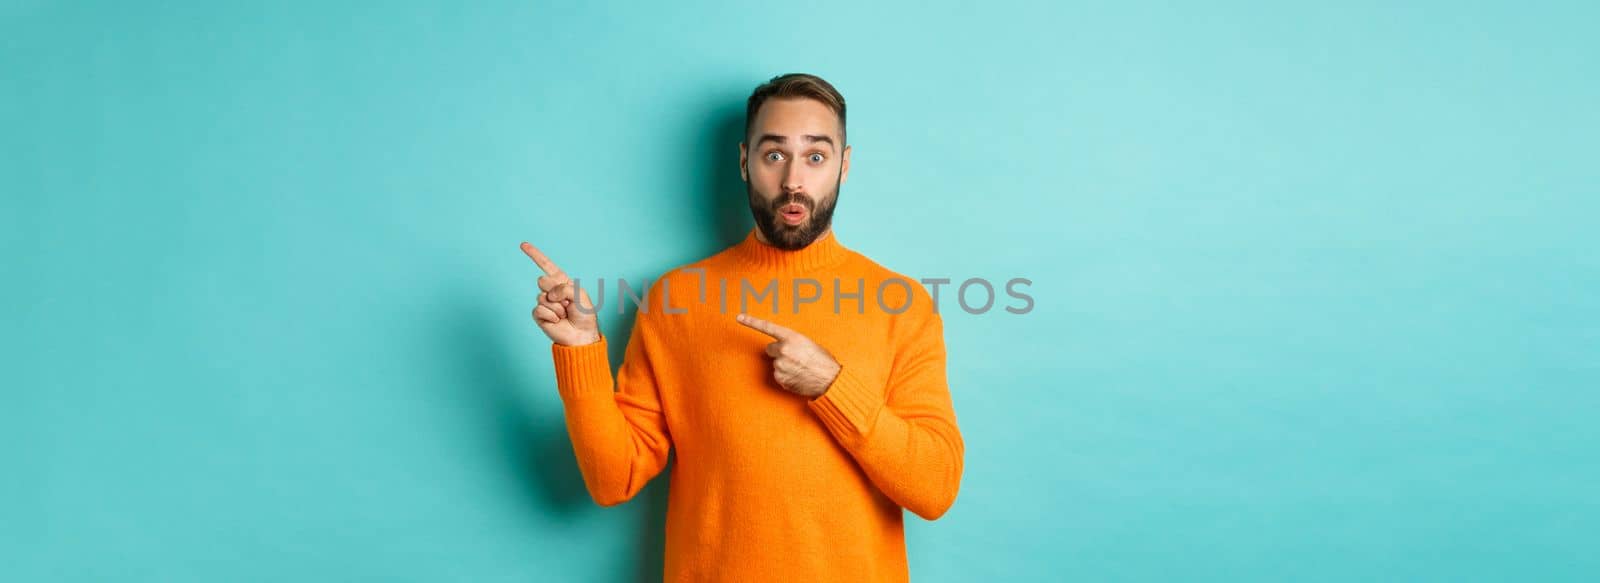 Amazed guy showing advertisement, pointing fingers right at banner, standing against turquoise background.